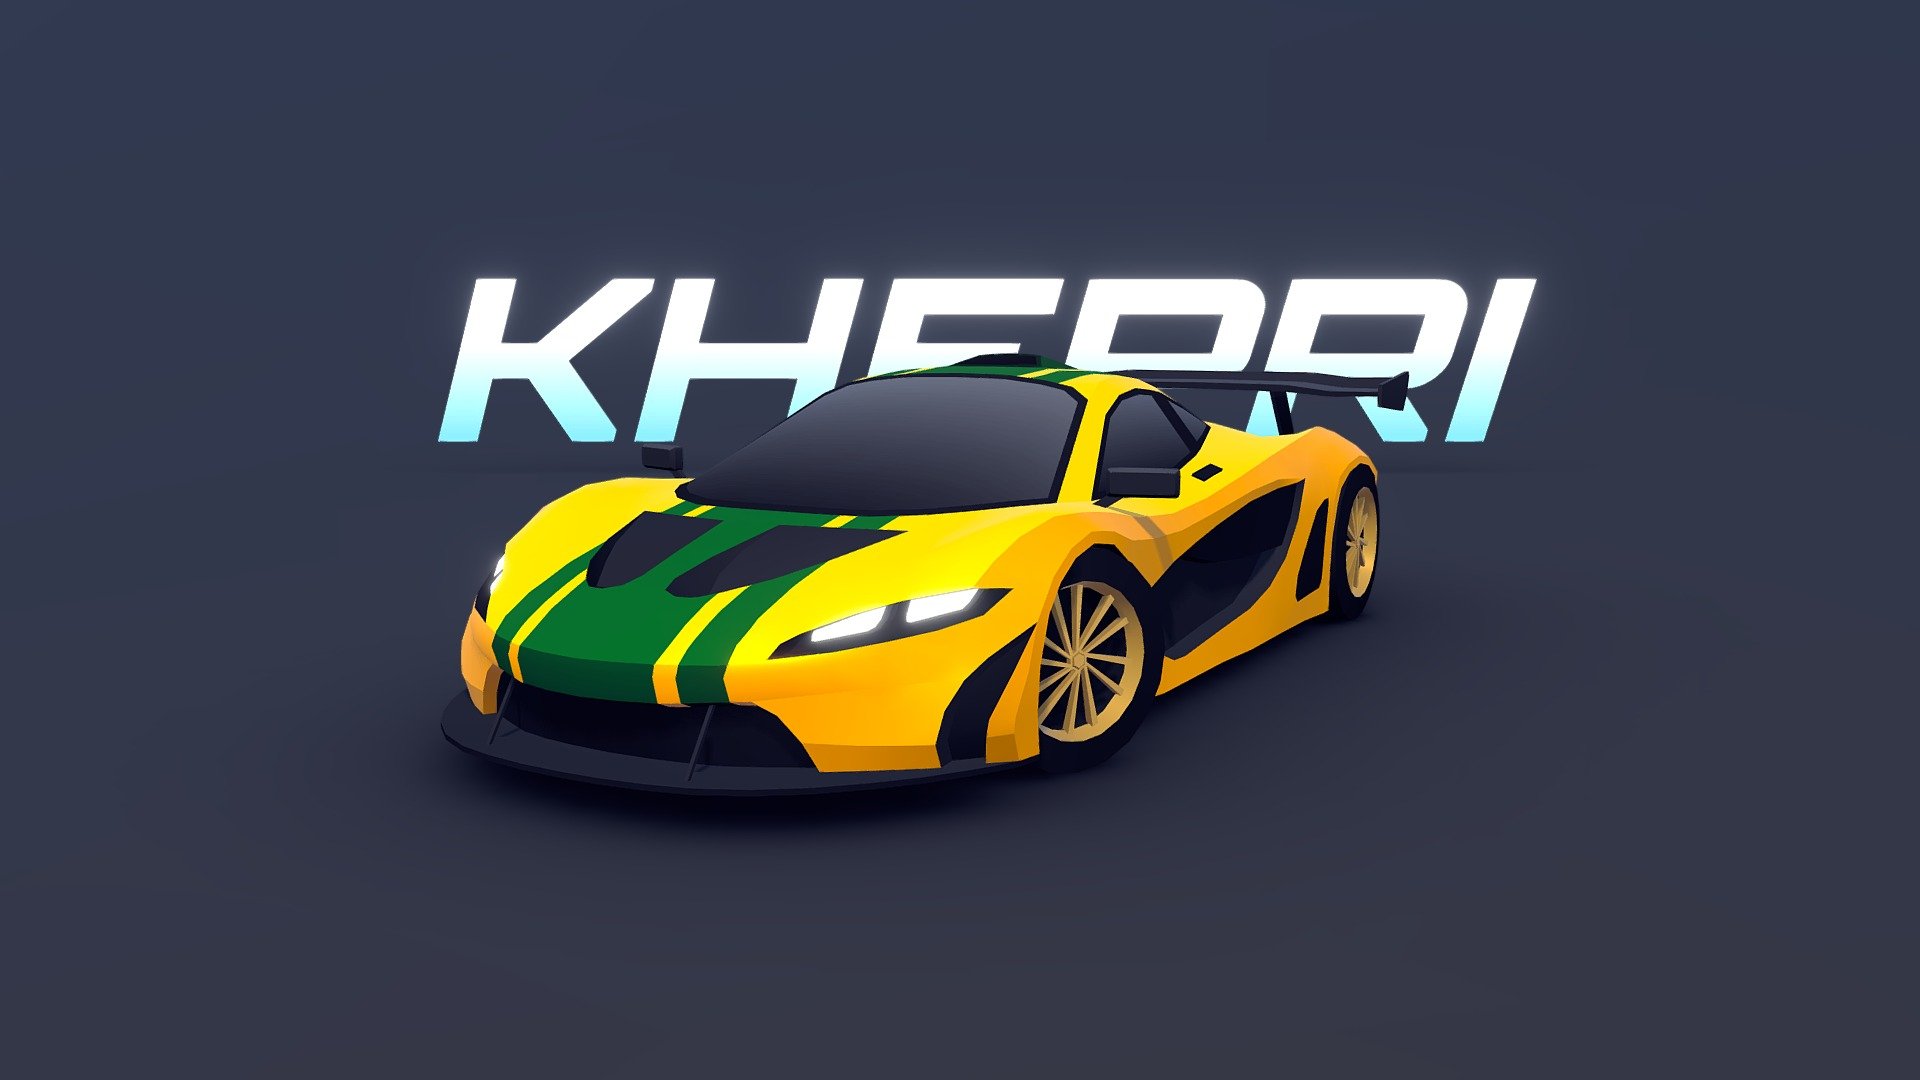 This car can be found in ARCADE: Ultimate Vehicles Pack alongside other 255 vehicles! . This pack is available in Sketchfab, Unity Asset Store and Mena's website (50% OFF for limited time).

Best regards!.

 - ARCADE: "Khepri" Hypercar - 3D model by Mena (@MenaStudios) 3d model